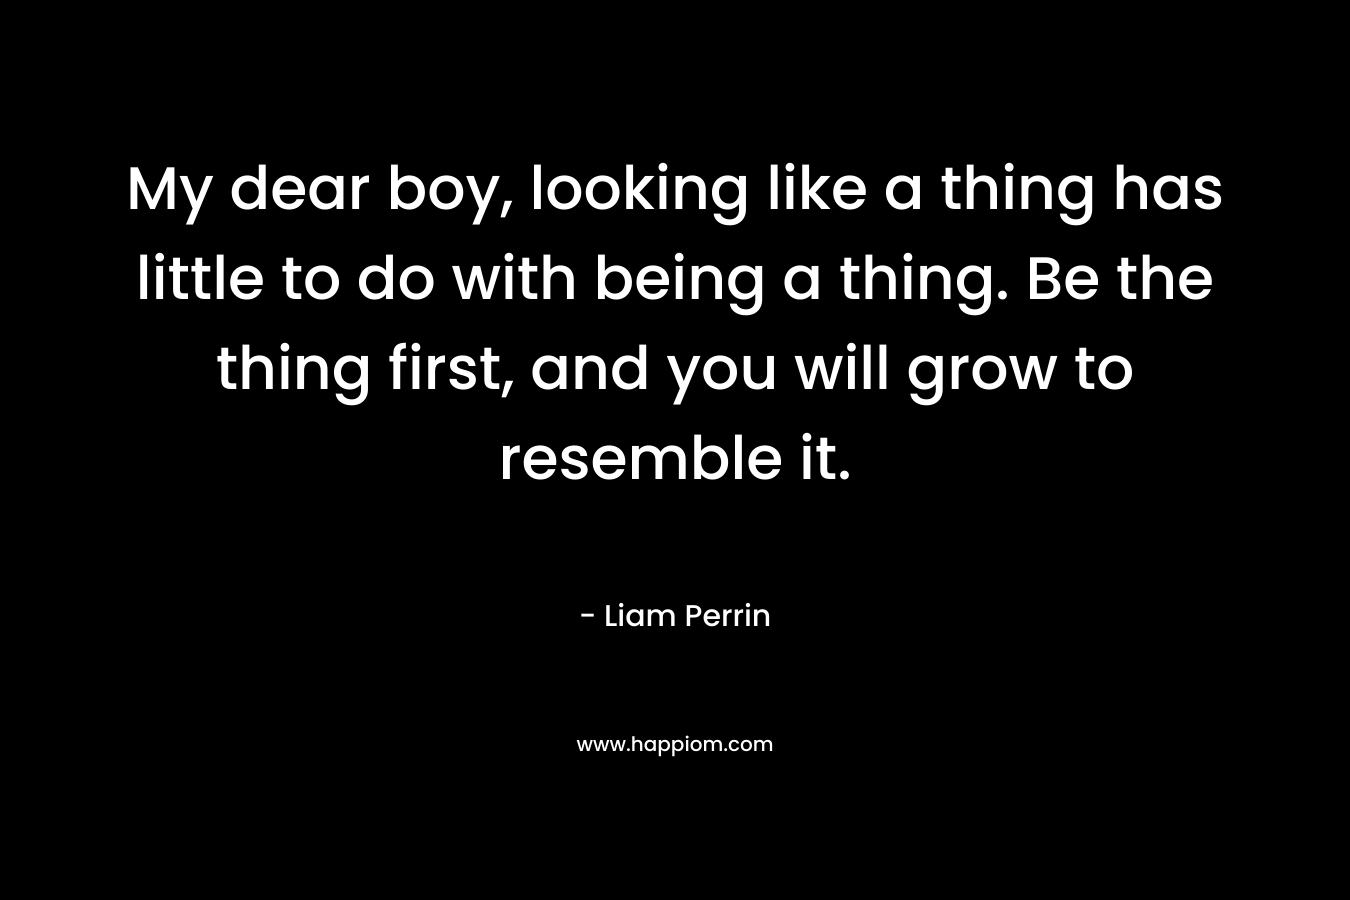 My dear boy, looking like a thing has little to do with being a thing. Be the thing first, and you will grow to resemble it. – Liam Perrin